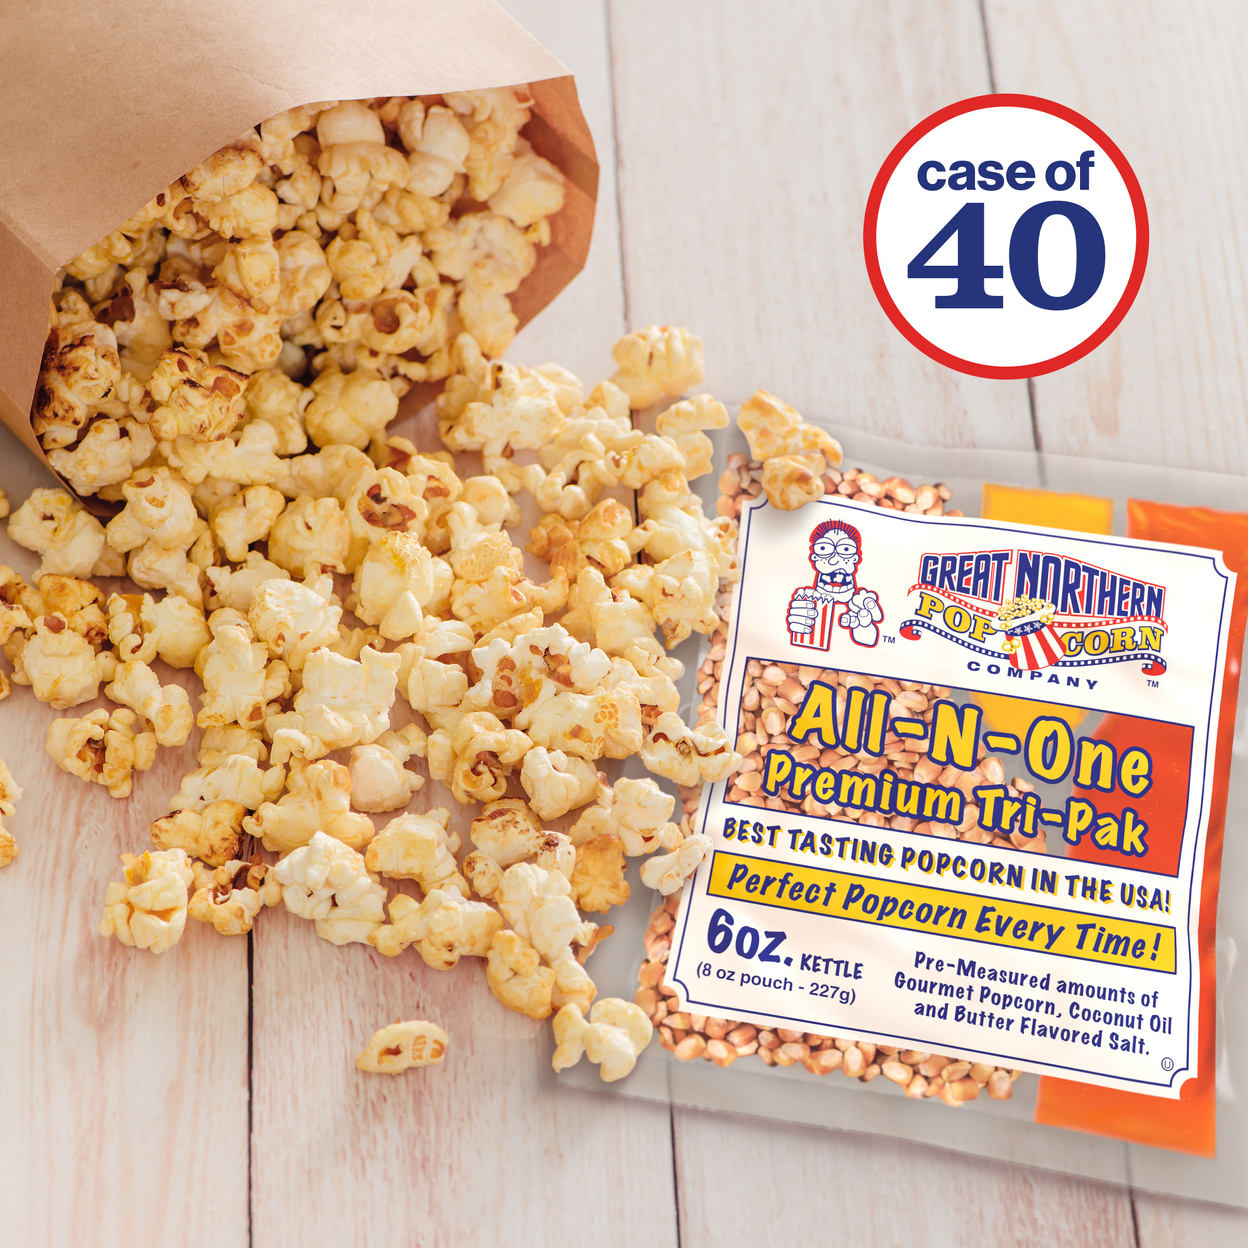 6 Oz Popcorn Packs Pre-Measured, Movie Theater Style, All-in-One Case Of 40